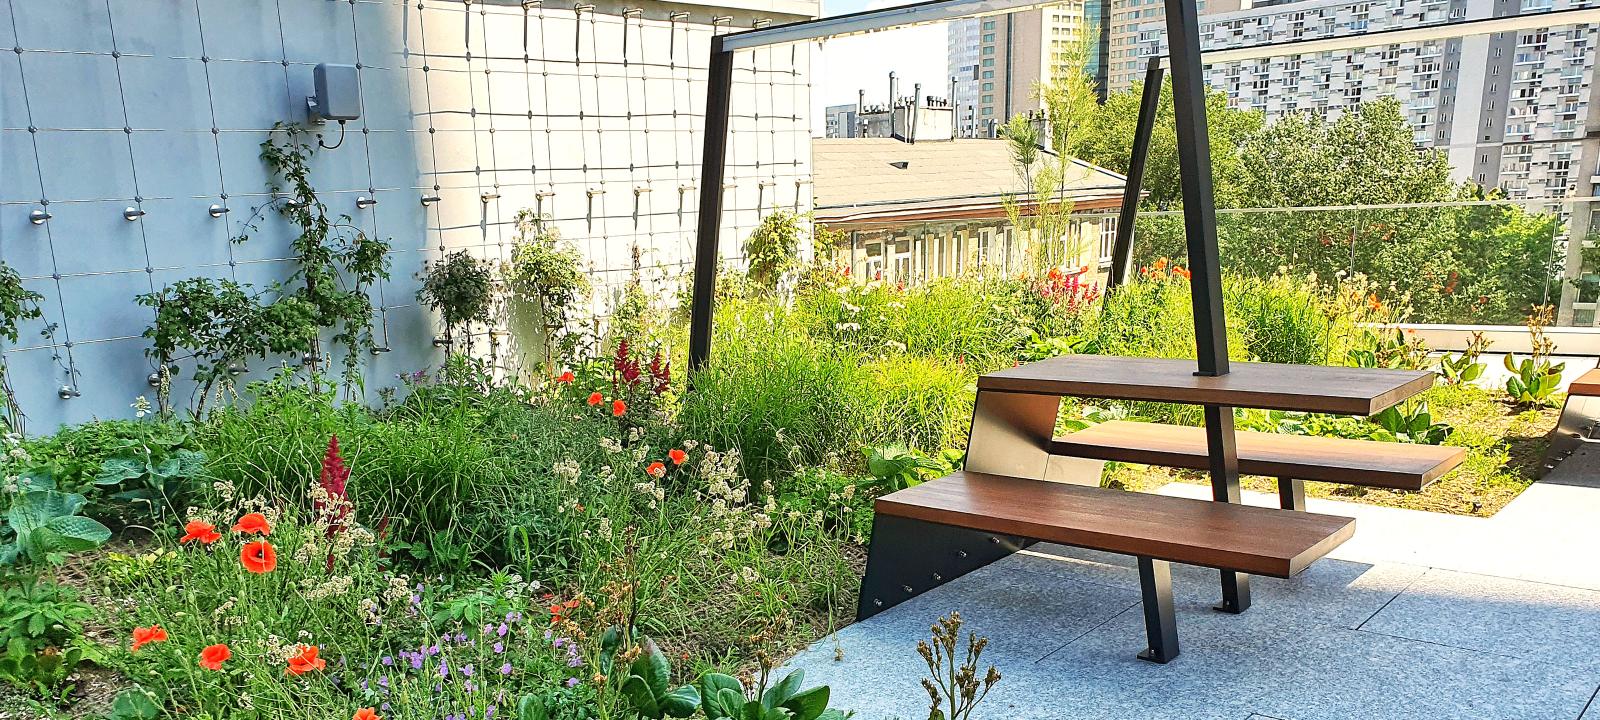 Roof garden with seating area